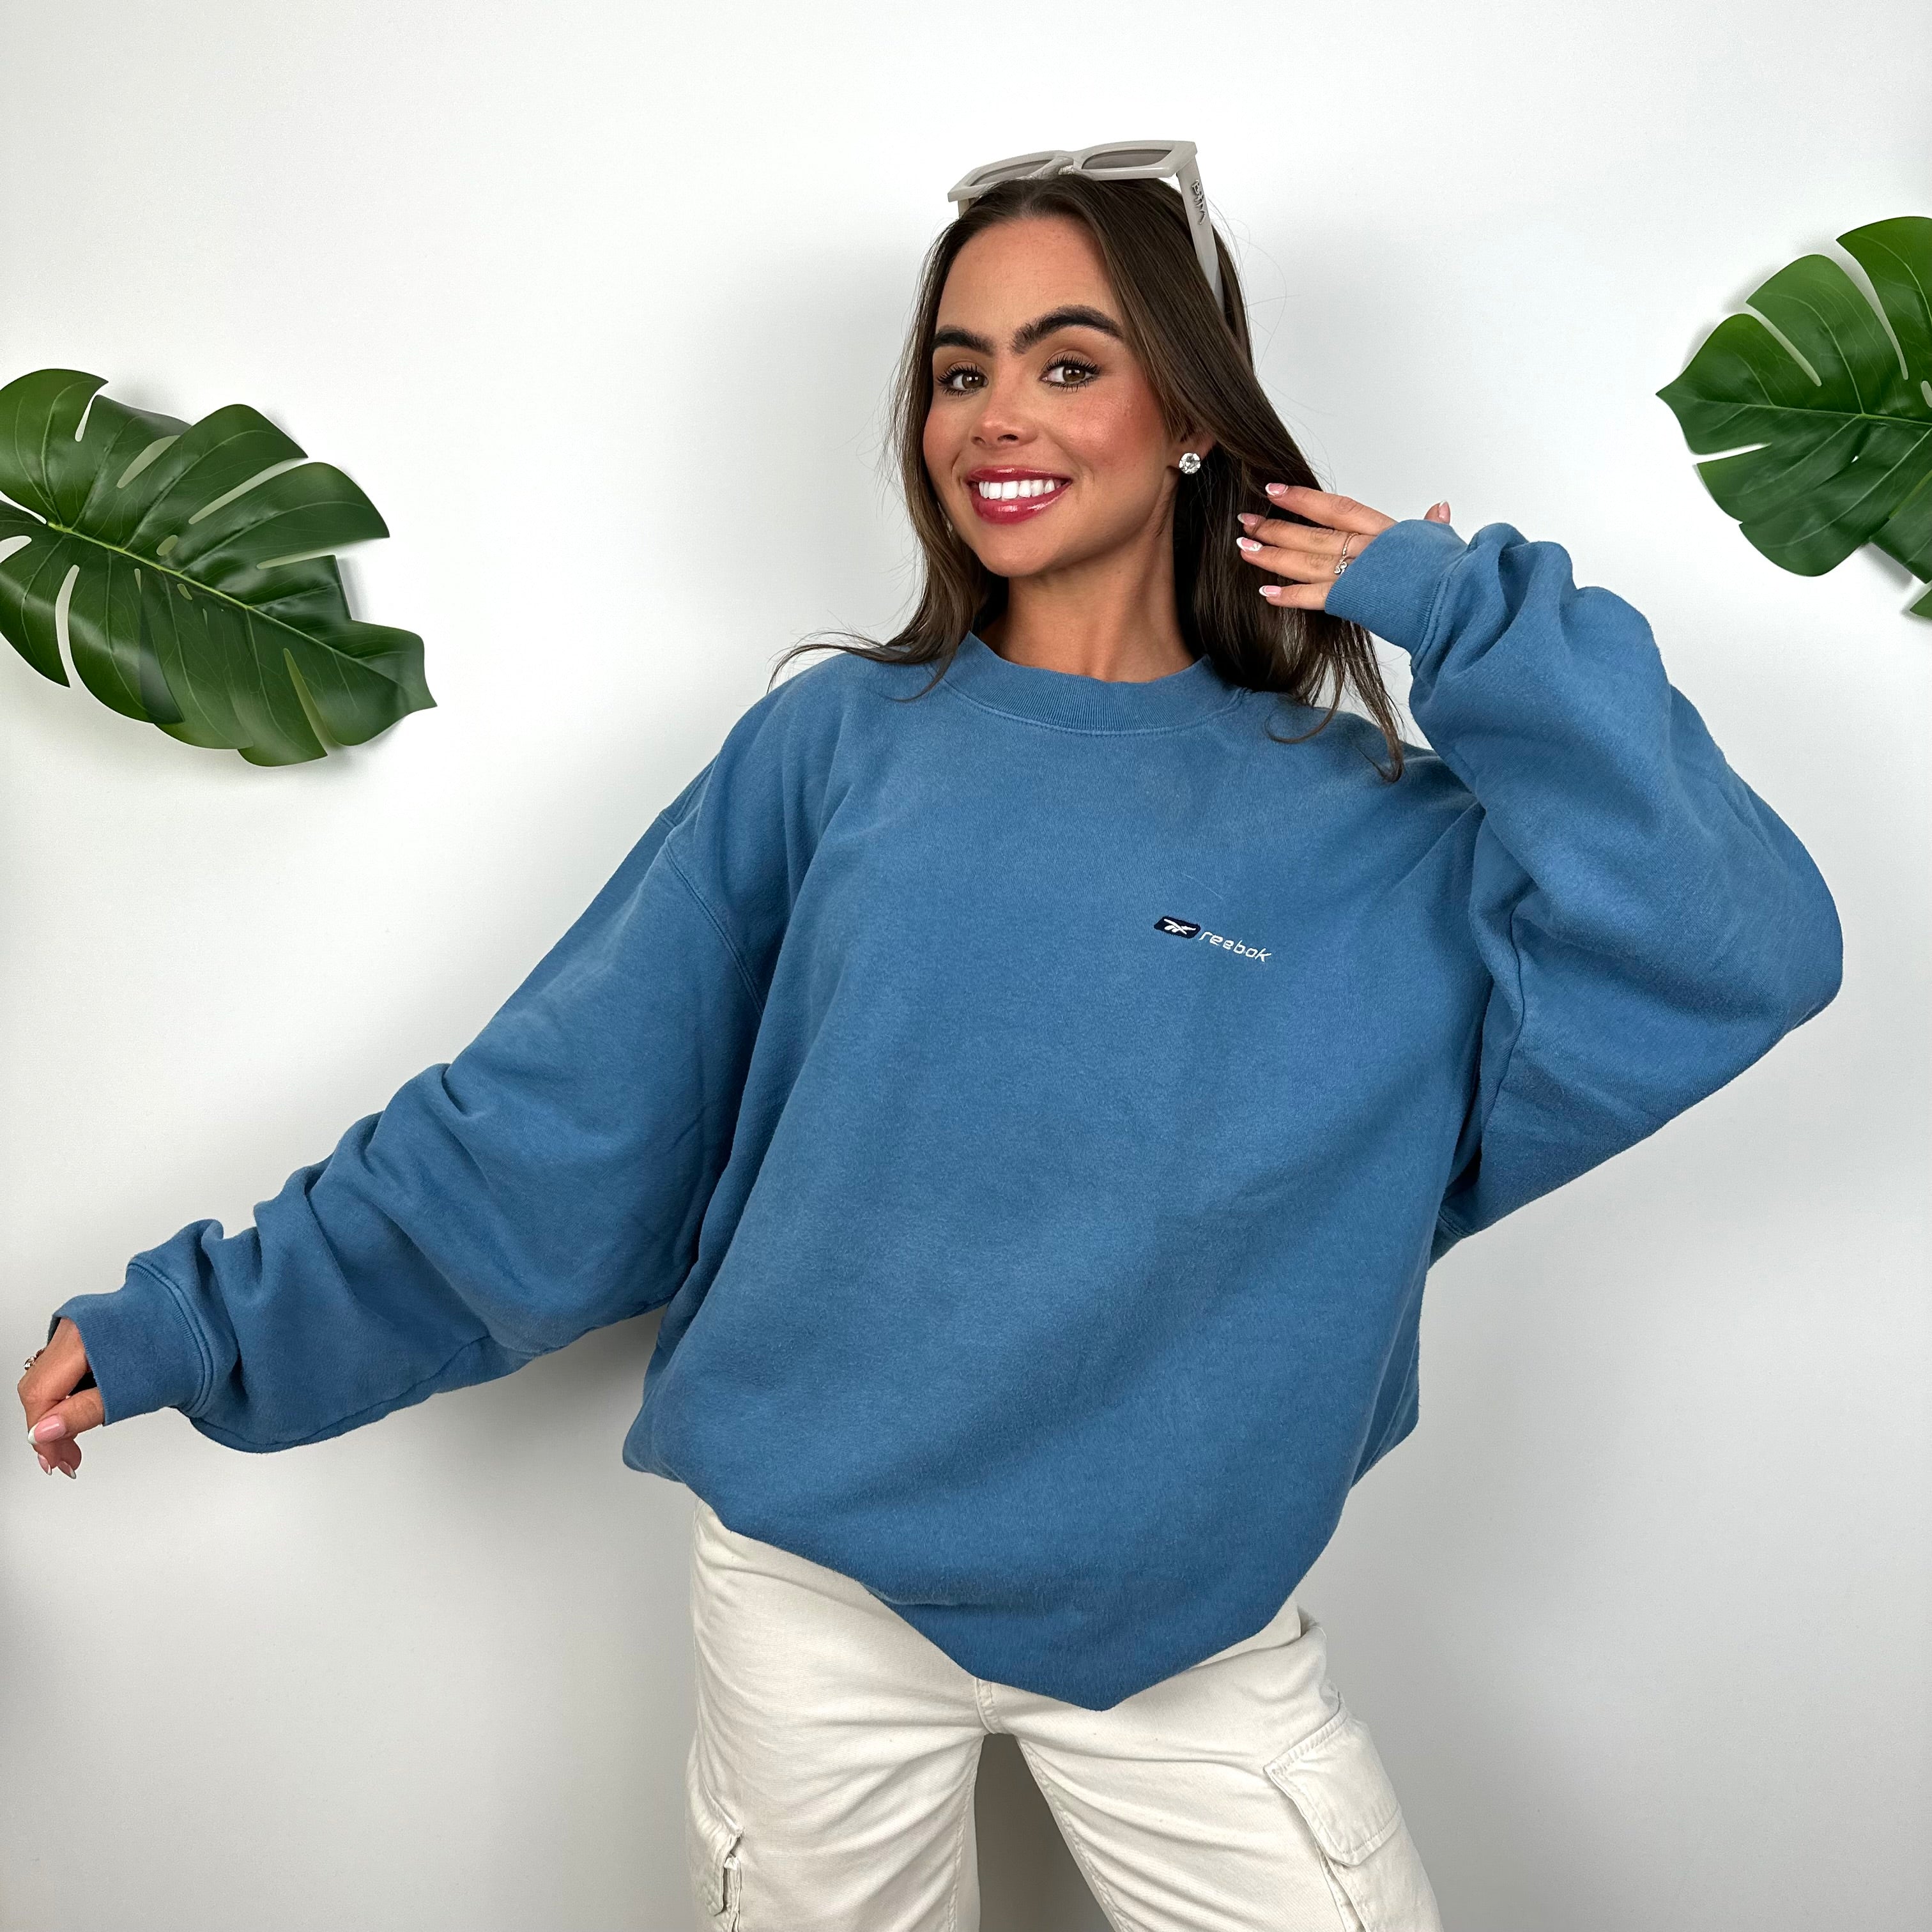 Reebok Blue Embroidered Spell Out Sweatshirt (L)